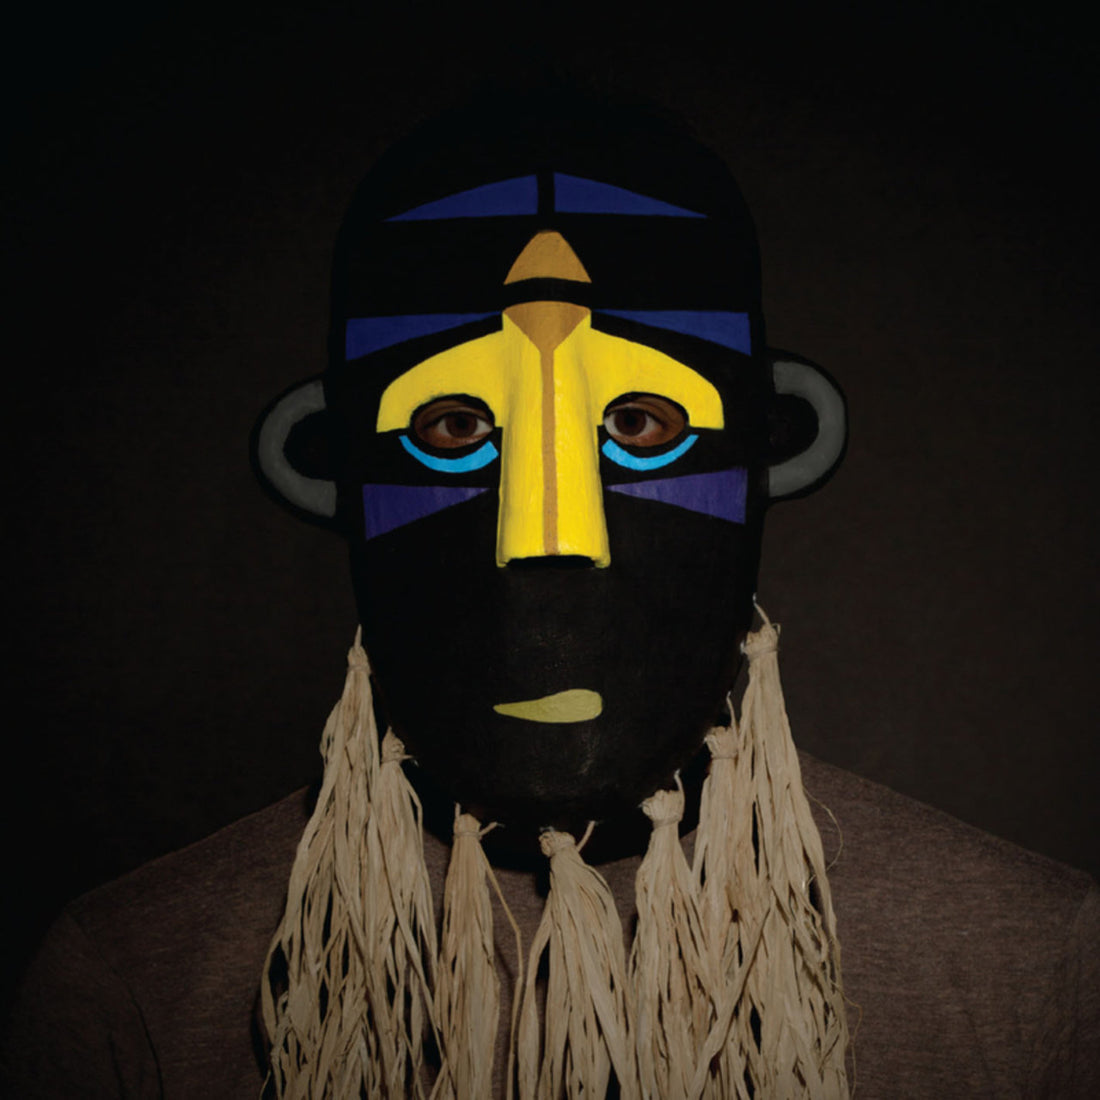 Now Playing: Wildfire - SBTRKT Featuring Little Dragon